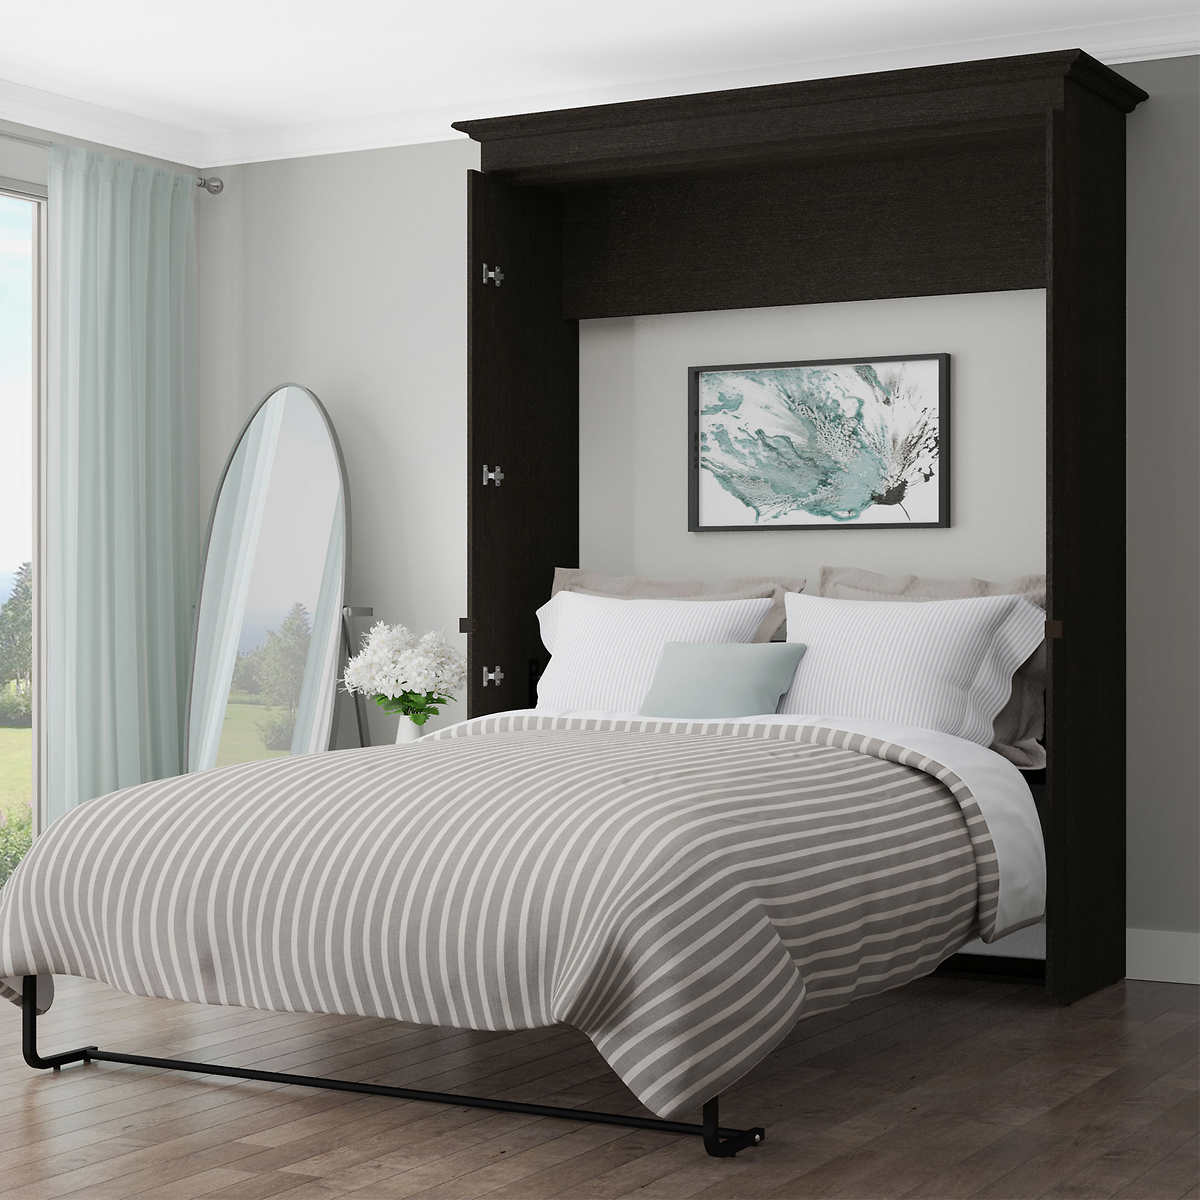 Willow Queen Wall Bed Costco, Wall Bed King Reviews